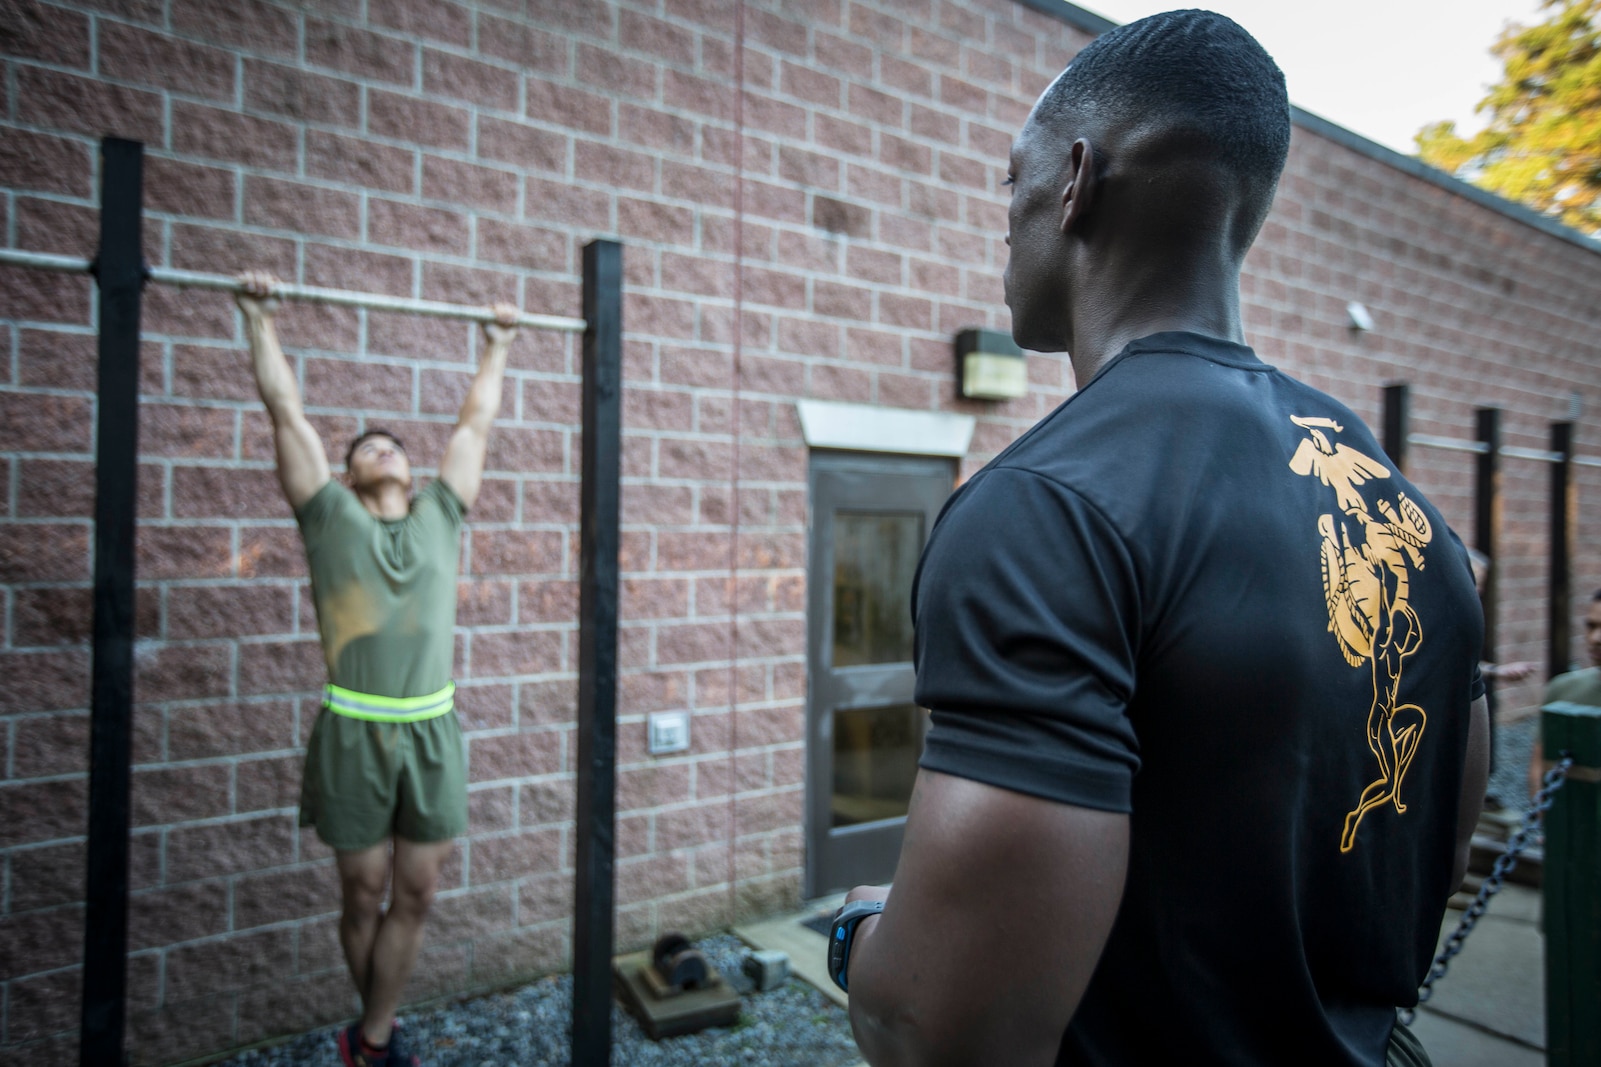 U.S. Marines conduct a physical fitness test during the  first Force Fitness Instructor Course aboard Marine Corps Base Quantico, VA. The course is designed to produce Fitness Instructors to return to the fleet and maintain health and wellness while improving human performance. (U.S. Marine Corps photo by Sgt. Melissa Marnell) 